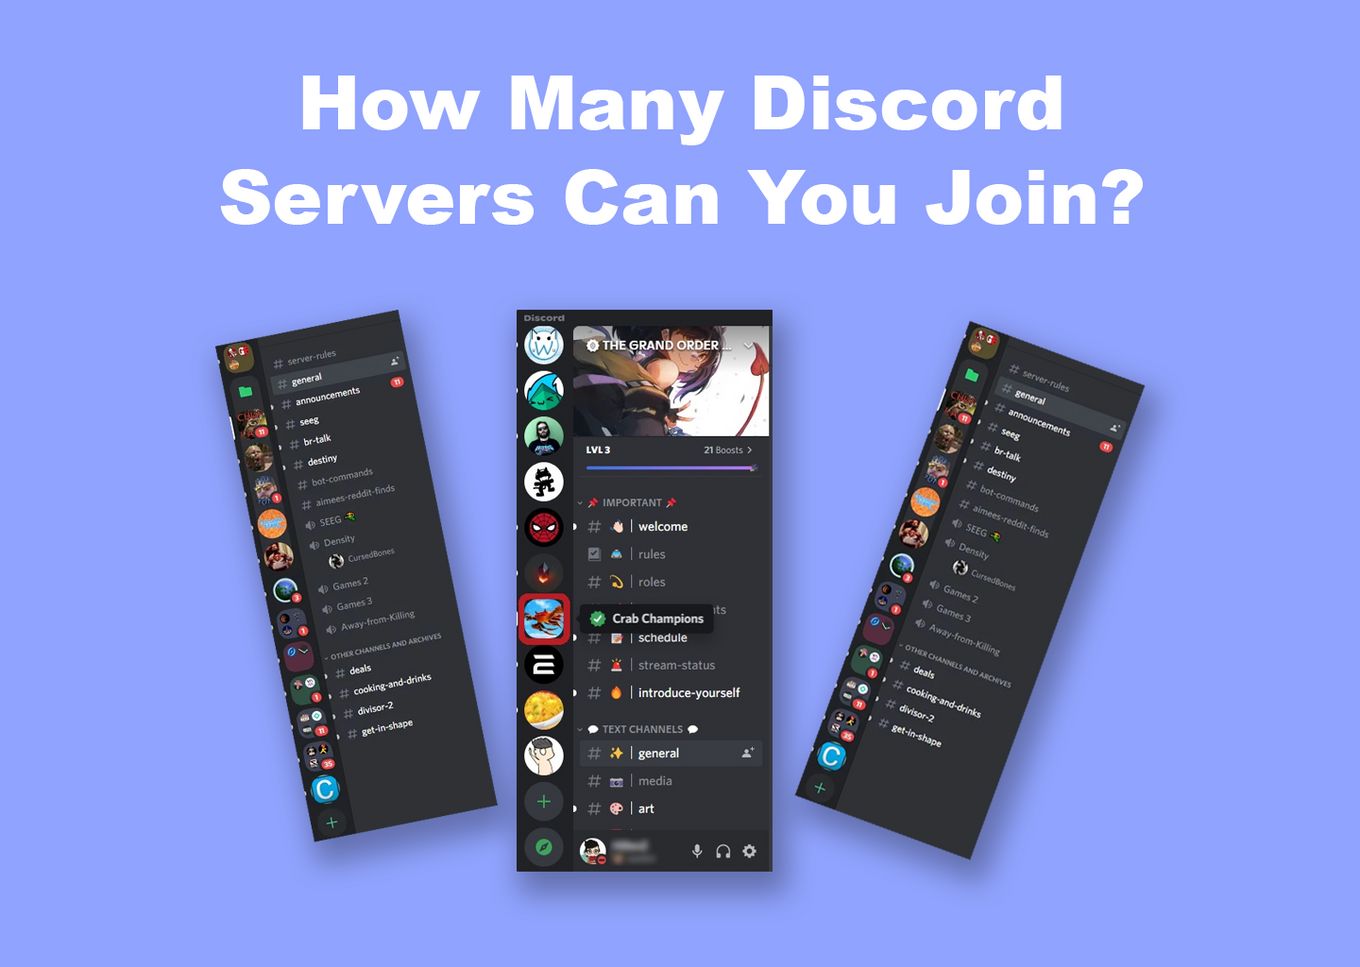 30 Discord Servers Anyone Can Join [Ultimate List]